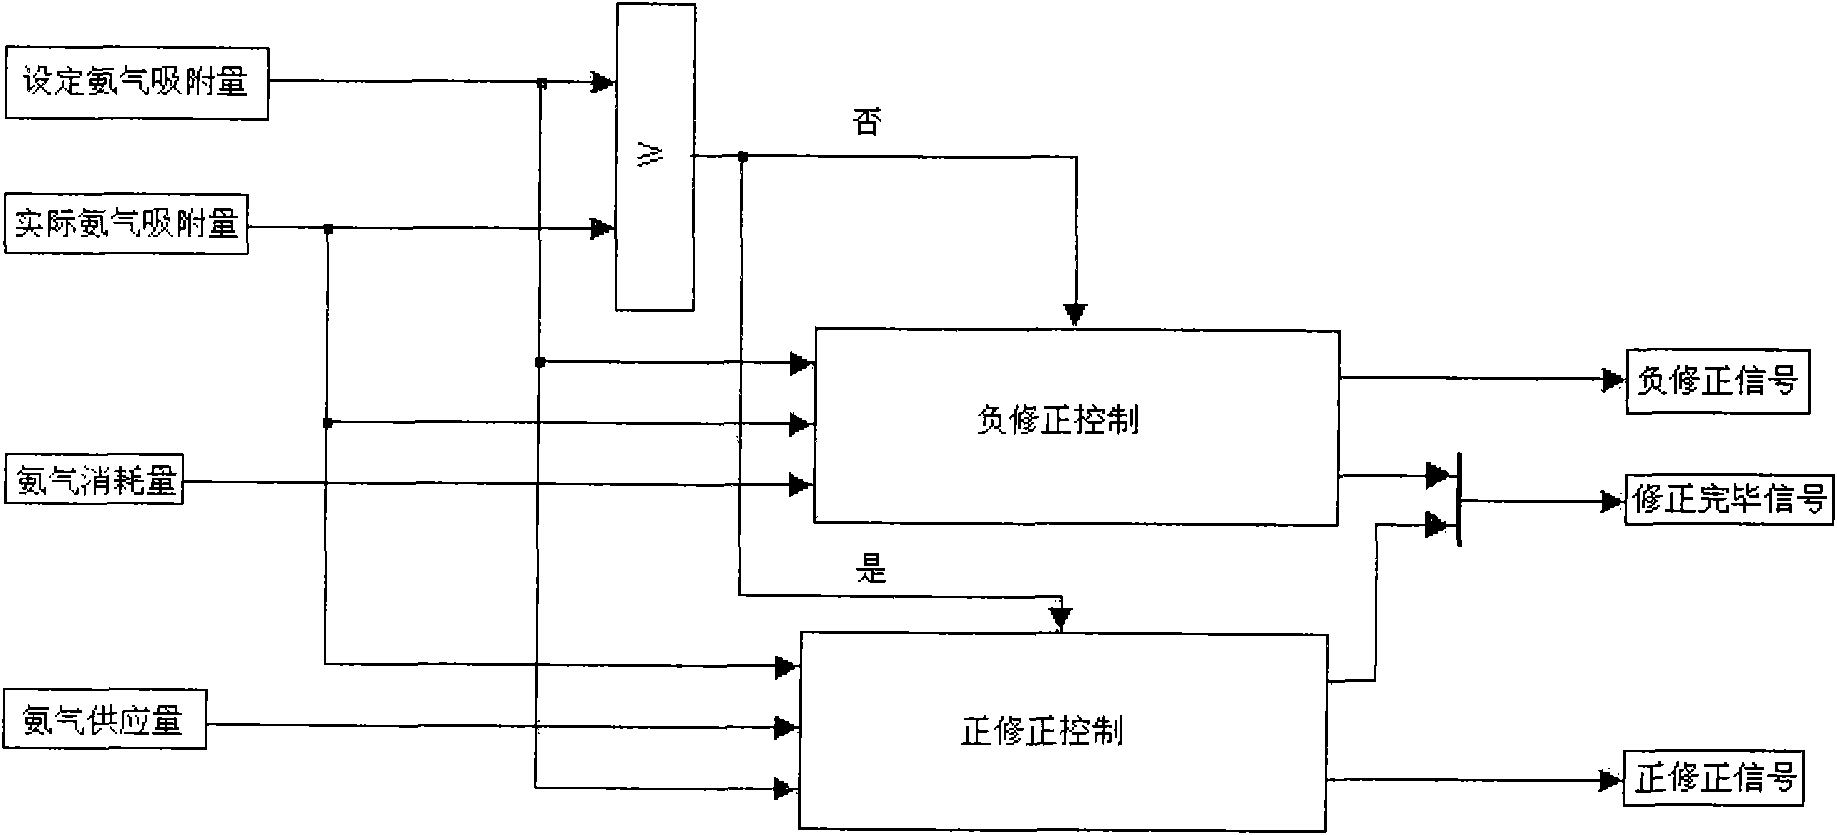 Absorption control method of ammonia inside SCR (Silicon Controlled Rectifier) catalyst